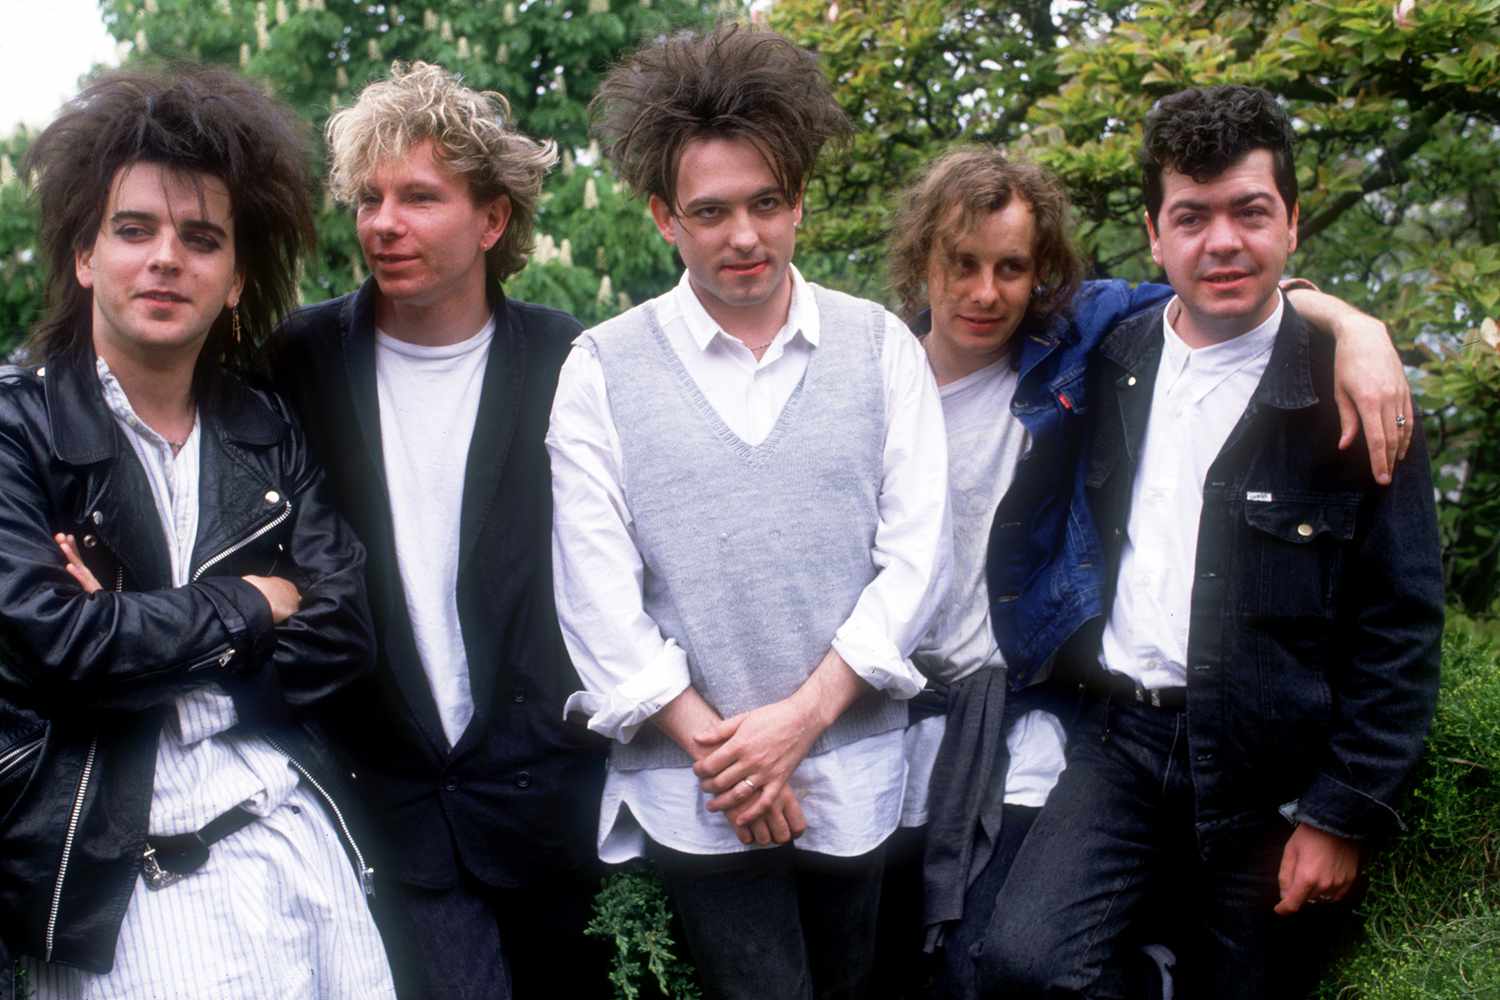 British group The Cure in 1987, the year they released the double album 'Kiss Me, Kiss Me, Kiss Me'. From left to right, they are bass player Simon Gallup, drummer Boris Williams, vocalist Robert Smith, guitarist Porl Thompson and keyboard player Laurence 'Lol' Tolhurst.